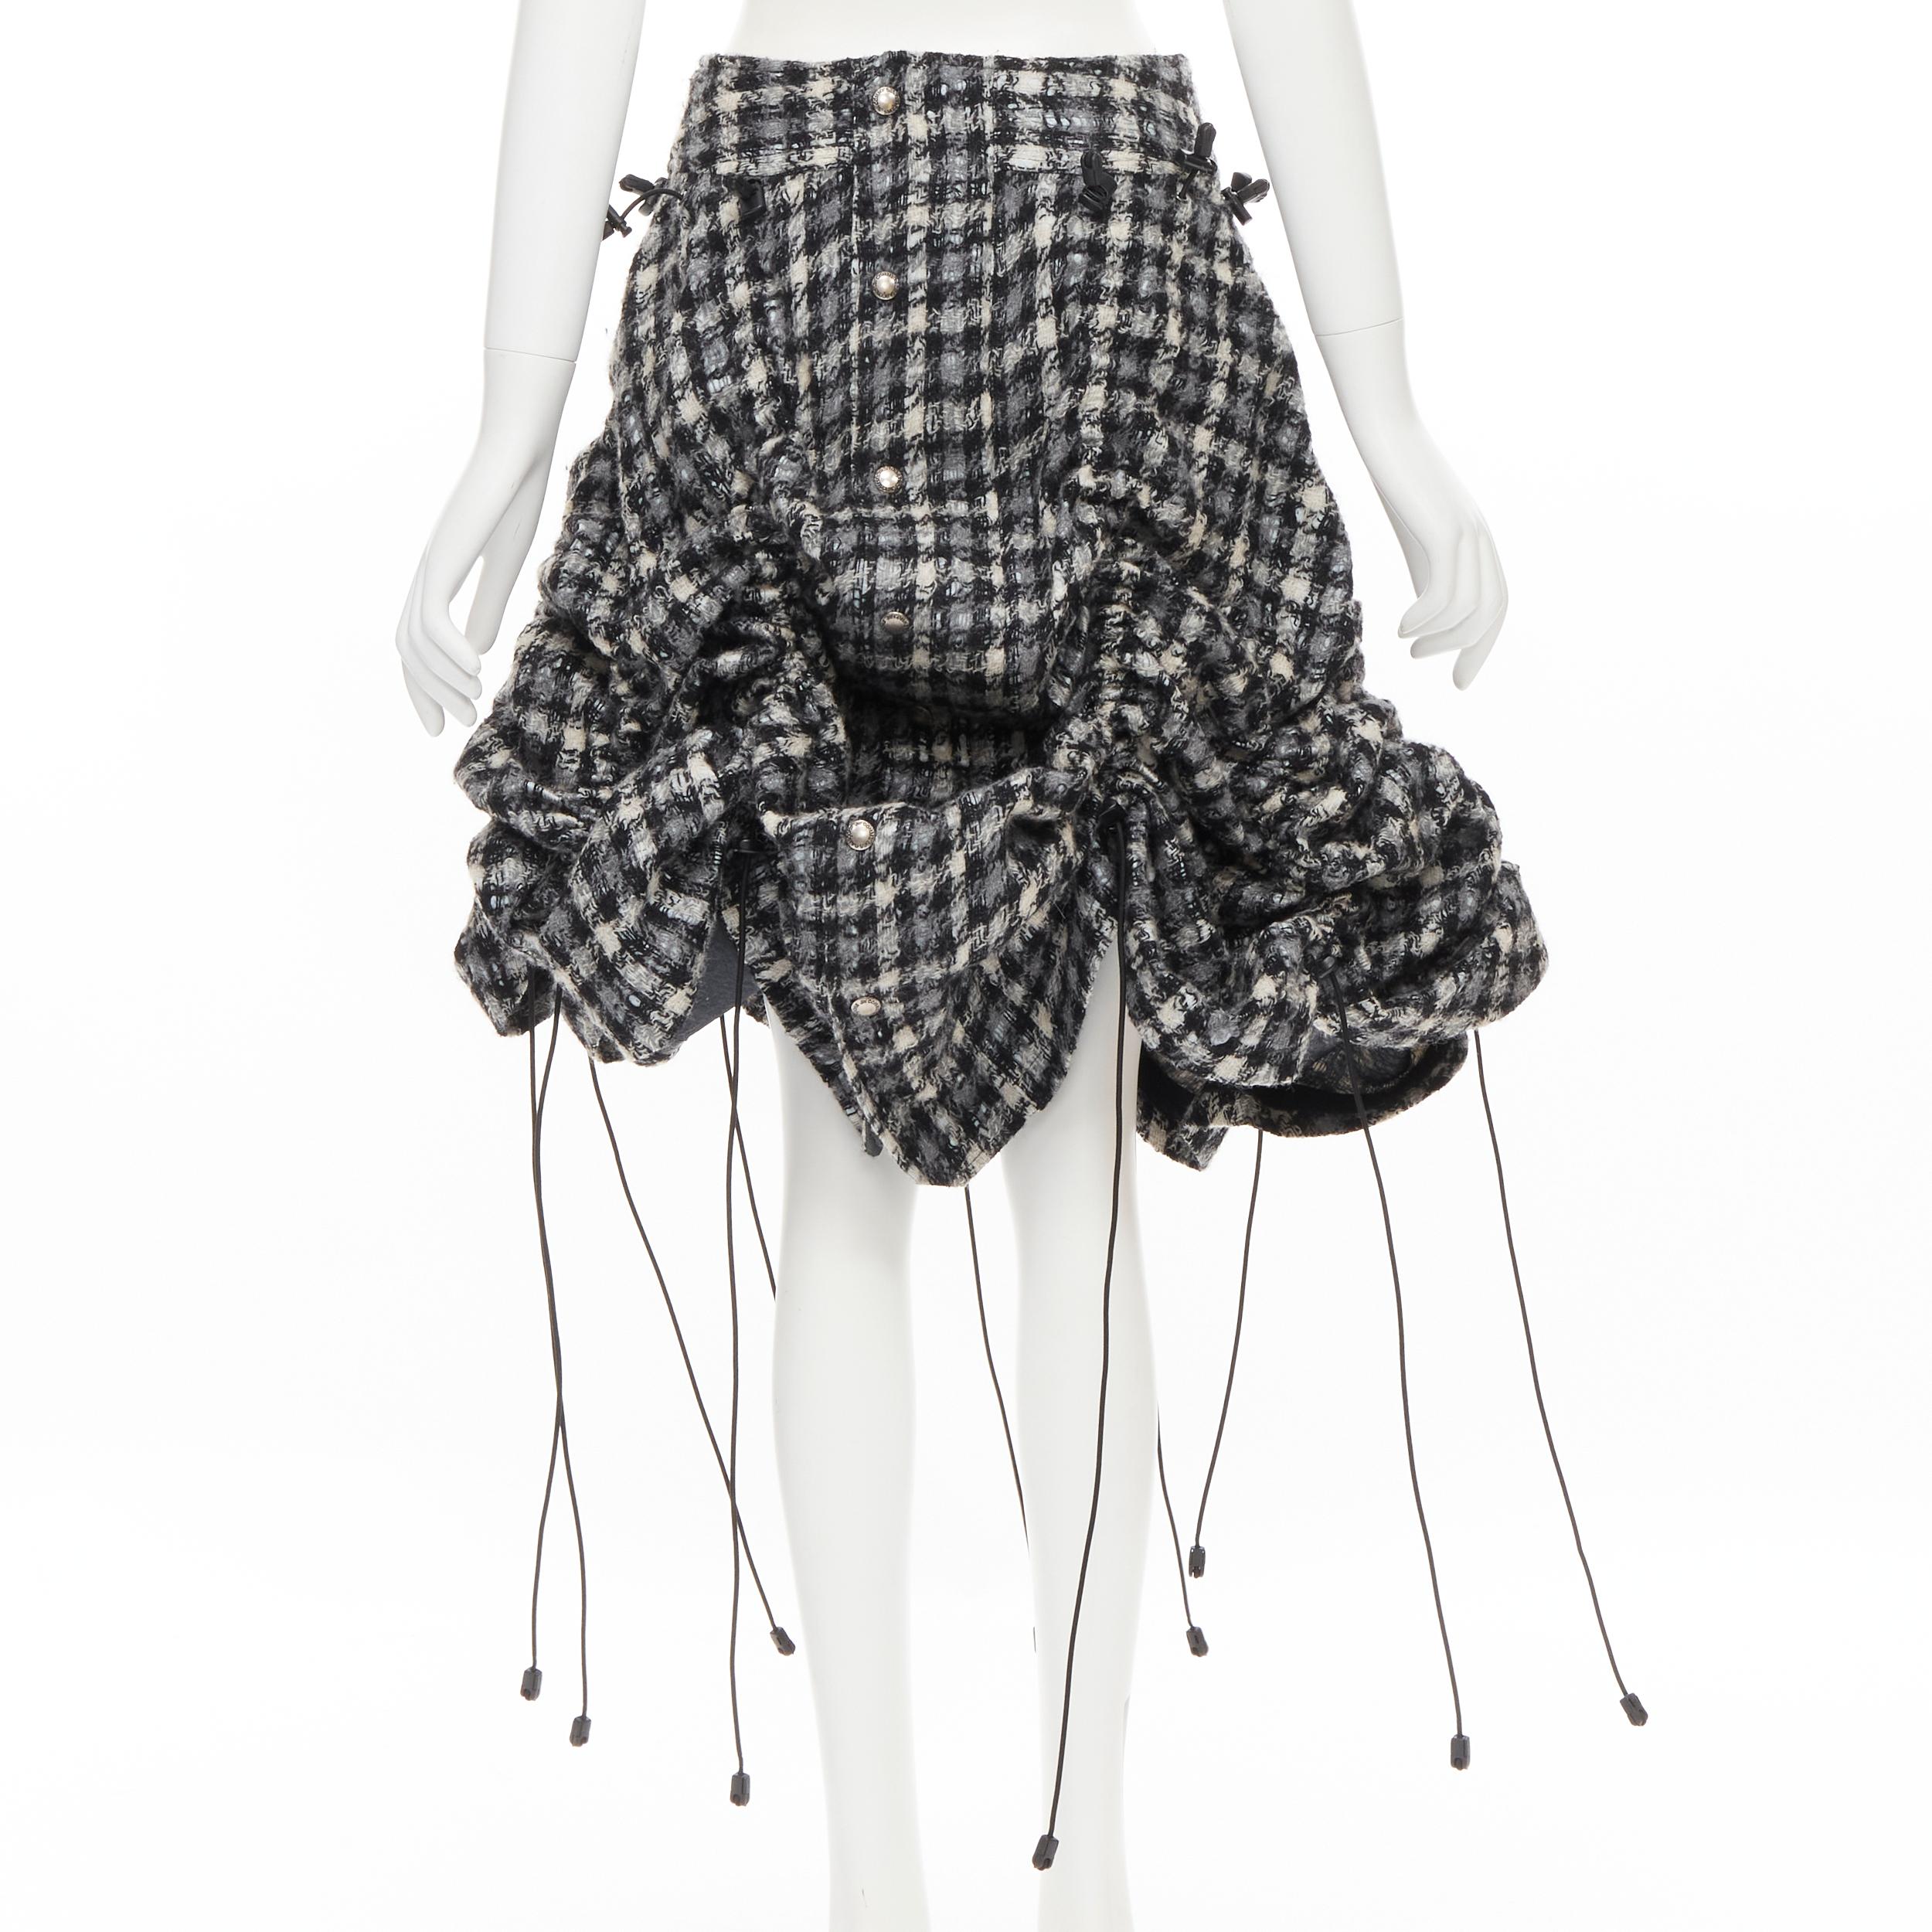 JUNYA WATANABE 2005 Windstopper grey houndstooth tweed parachute toggle skirt M Reference: CRTI/A00301 
Brand: Junya Watanabe 
Designer: Junya Watanabe 
Collection: 2005 Runway 
Material: Wool
Color: Grey 
Pattern: Check 
Closure: Zip 
Extra Detail: